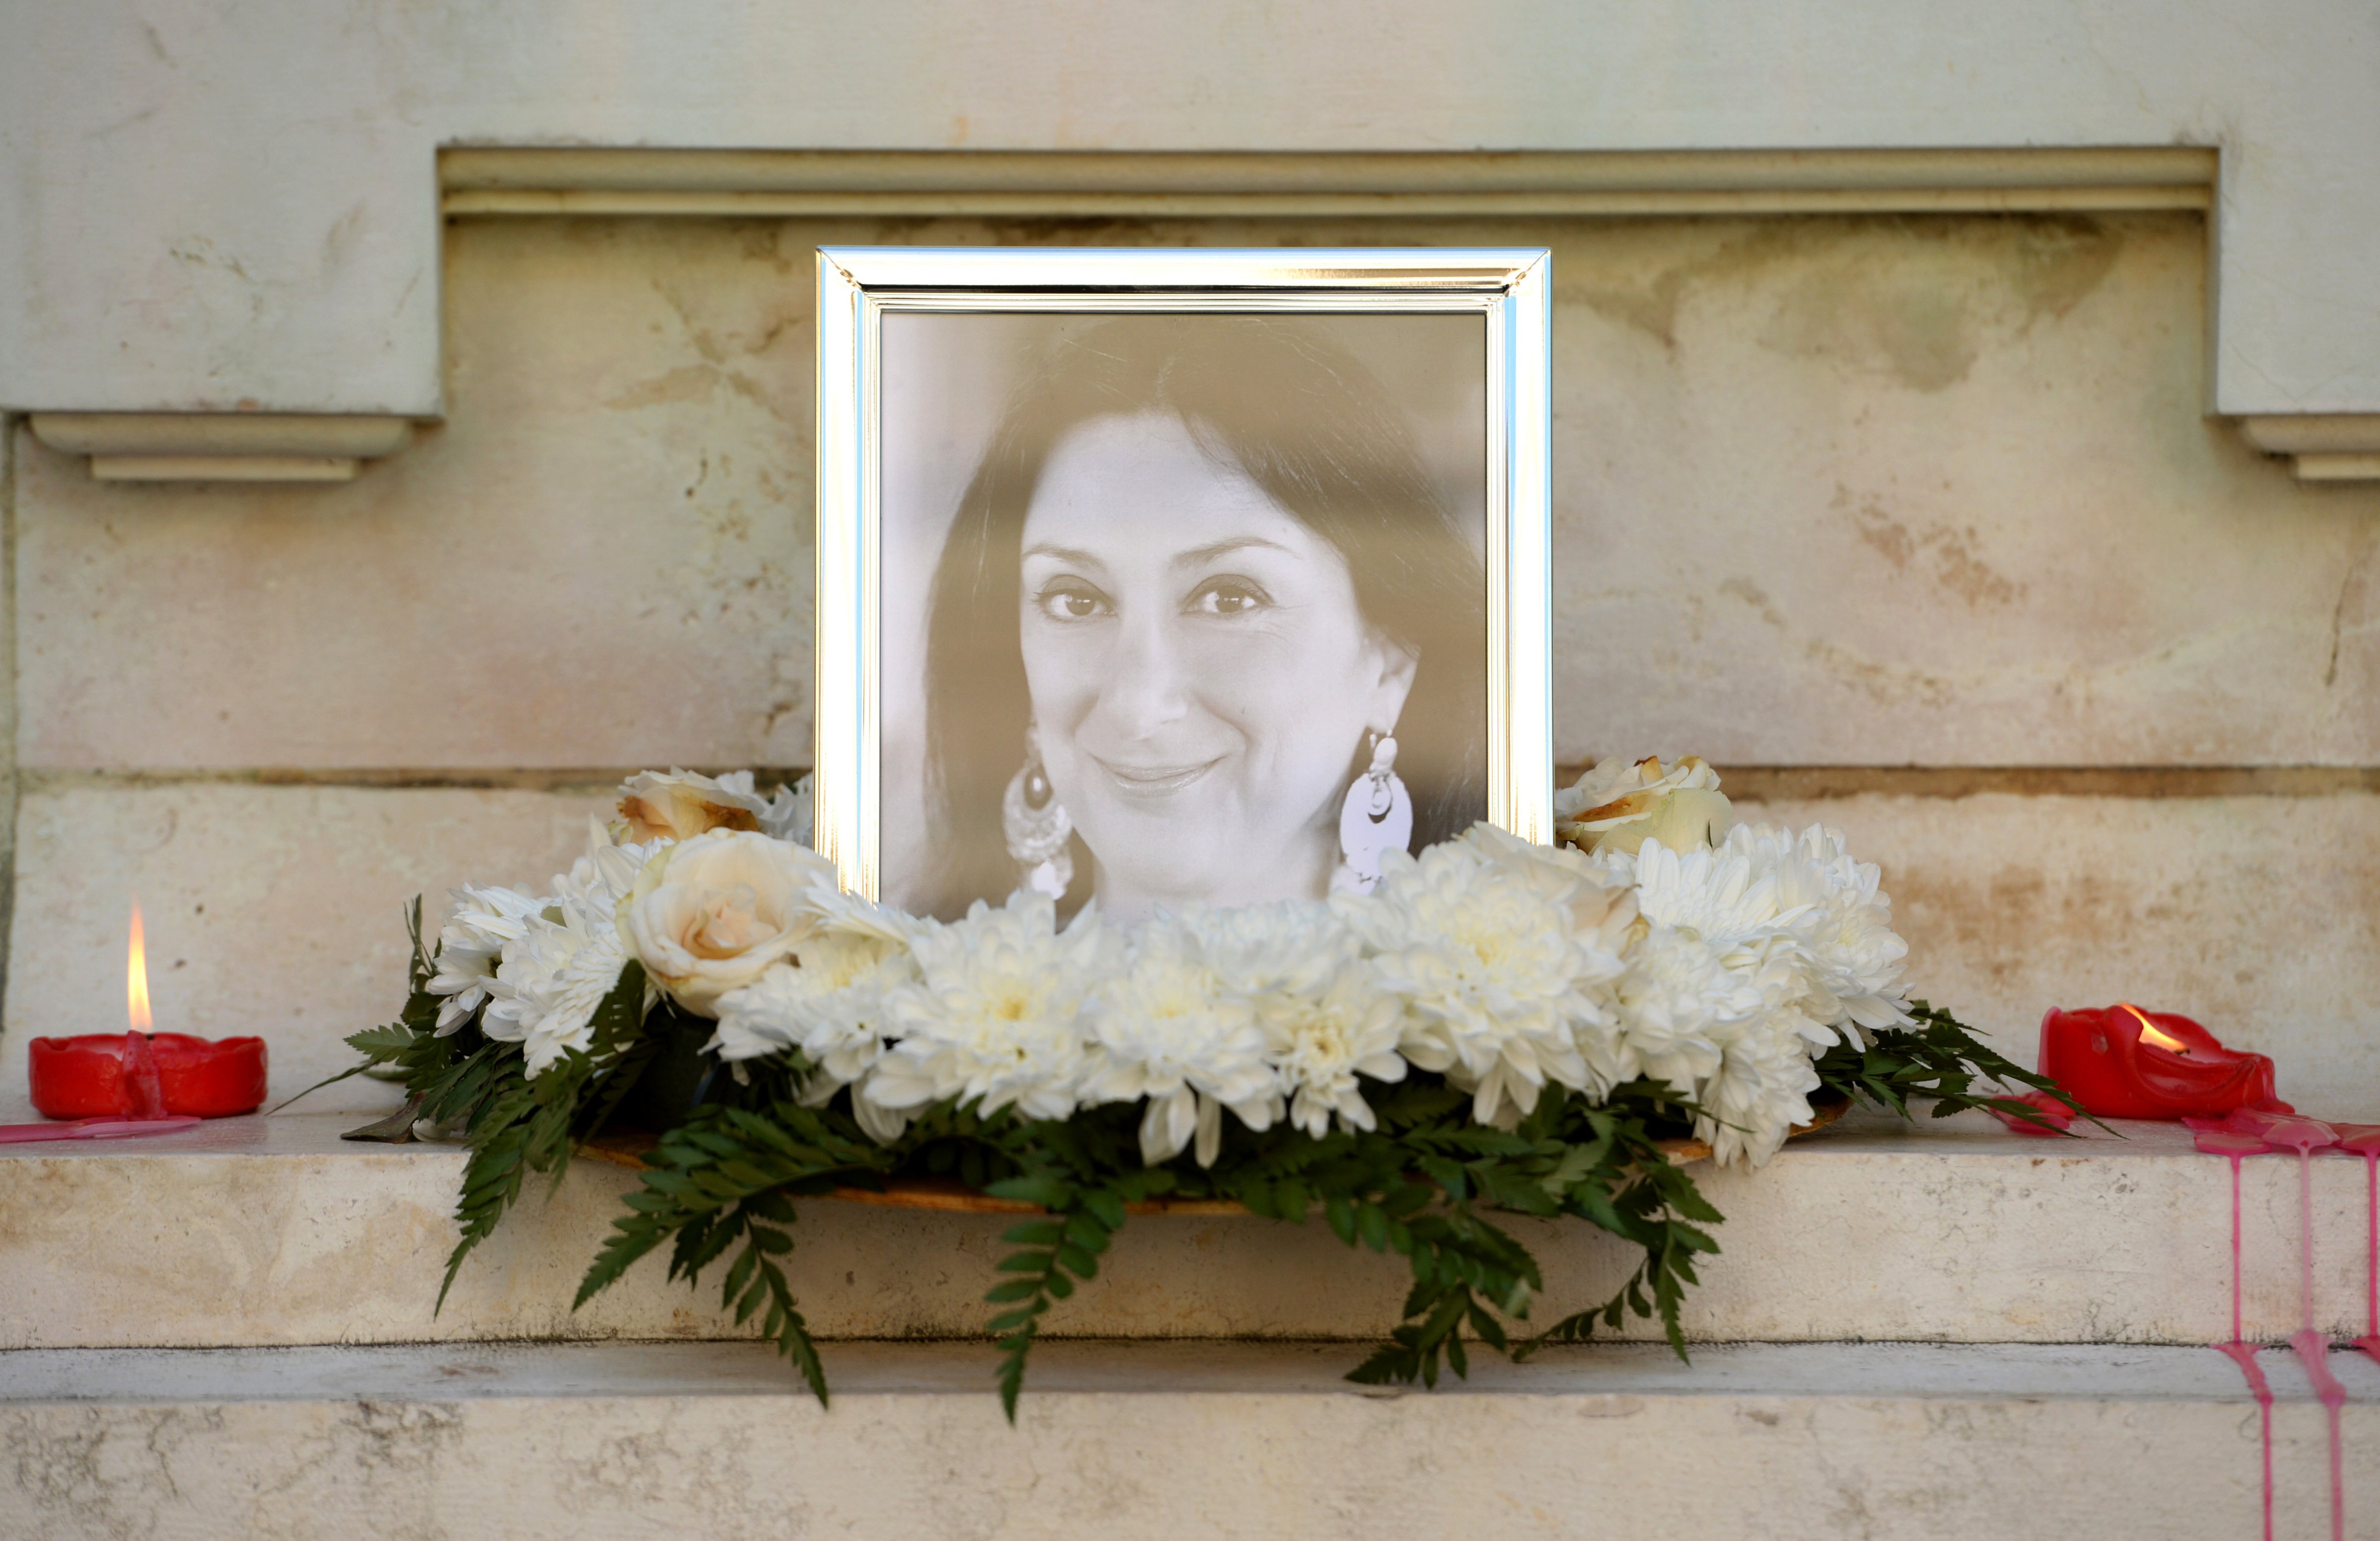 The family of Daphne Caruana Galizia, a Maltese journalist who was killed in 2017, have called on Malta's Prime Minister Joseph Muscat to resign immediately. (Matthew Mirabelli—AFP/Getty Images)